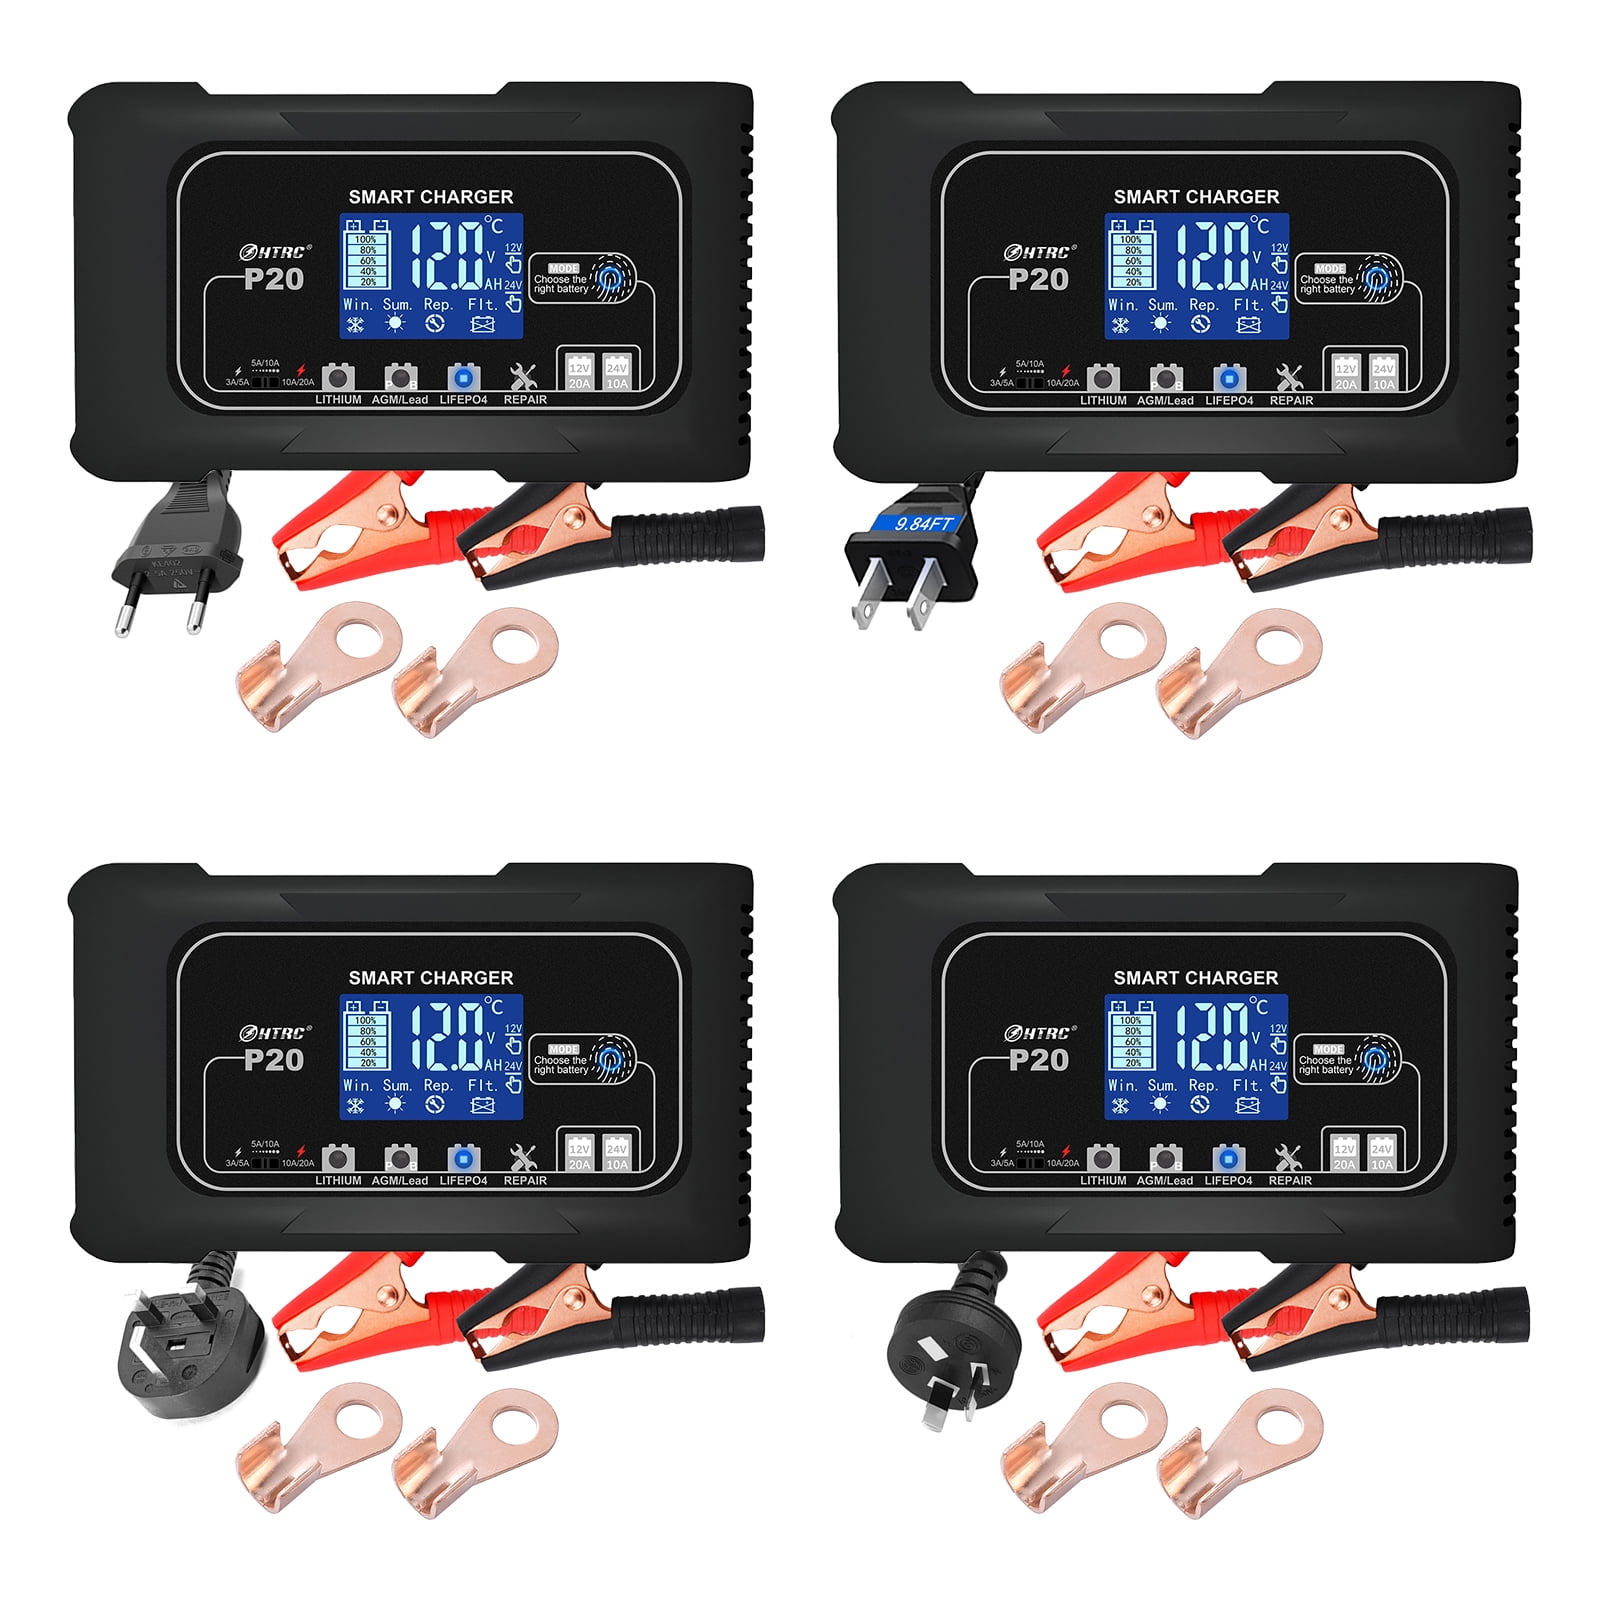 B2B Fast Charging 14.6V 20A LiFePO4 Battery Charger for 12V Batteries